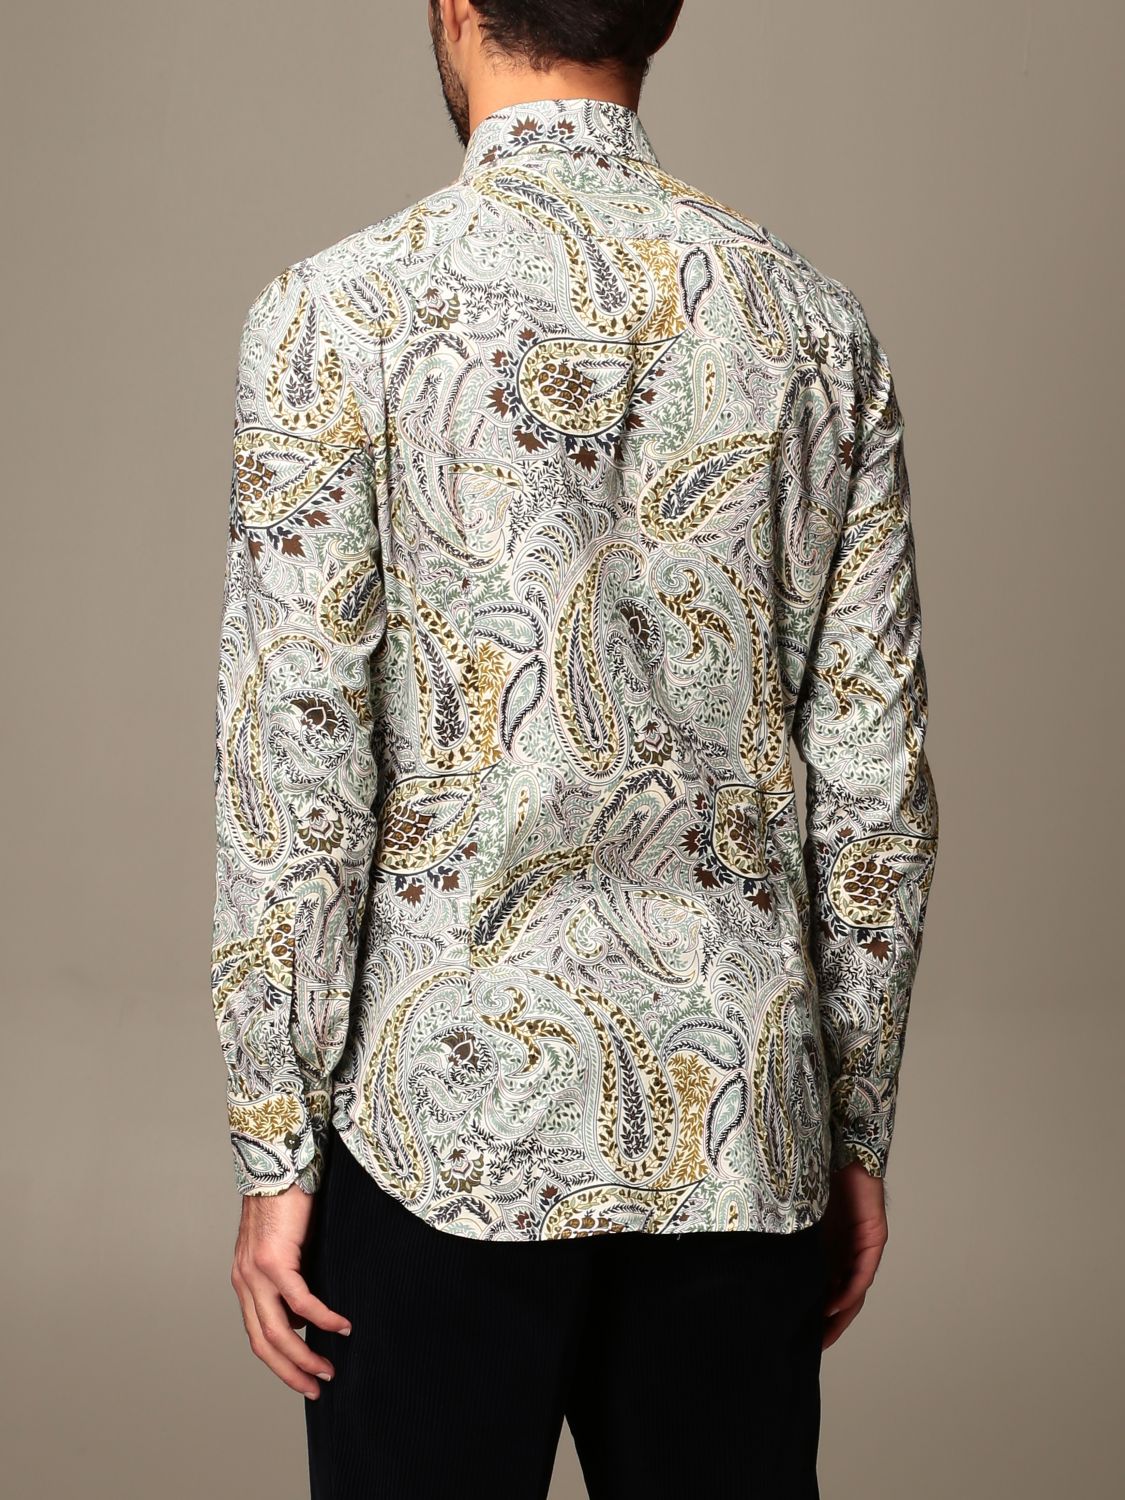 Etro Outlet: shirt in paisley cotton with French collar | Shirt Etro ...